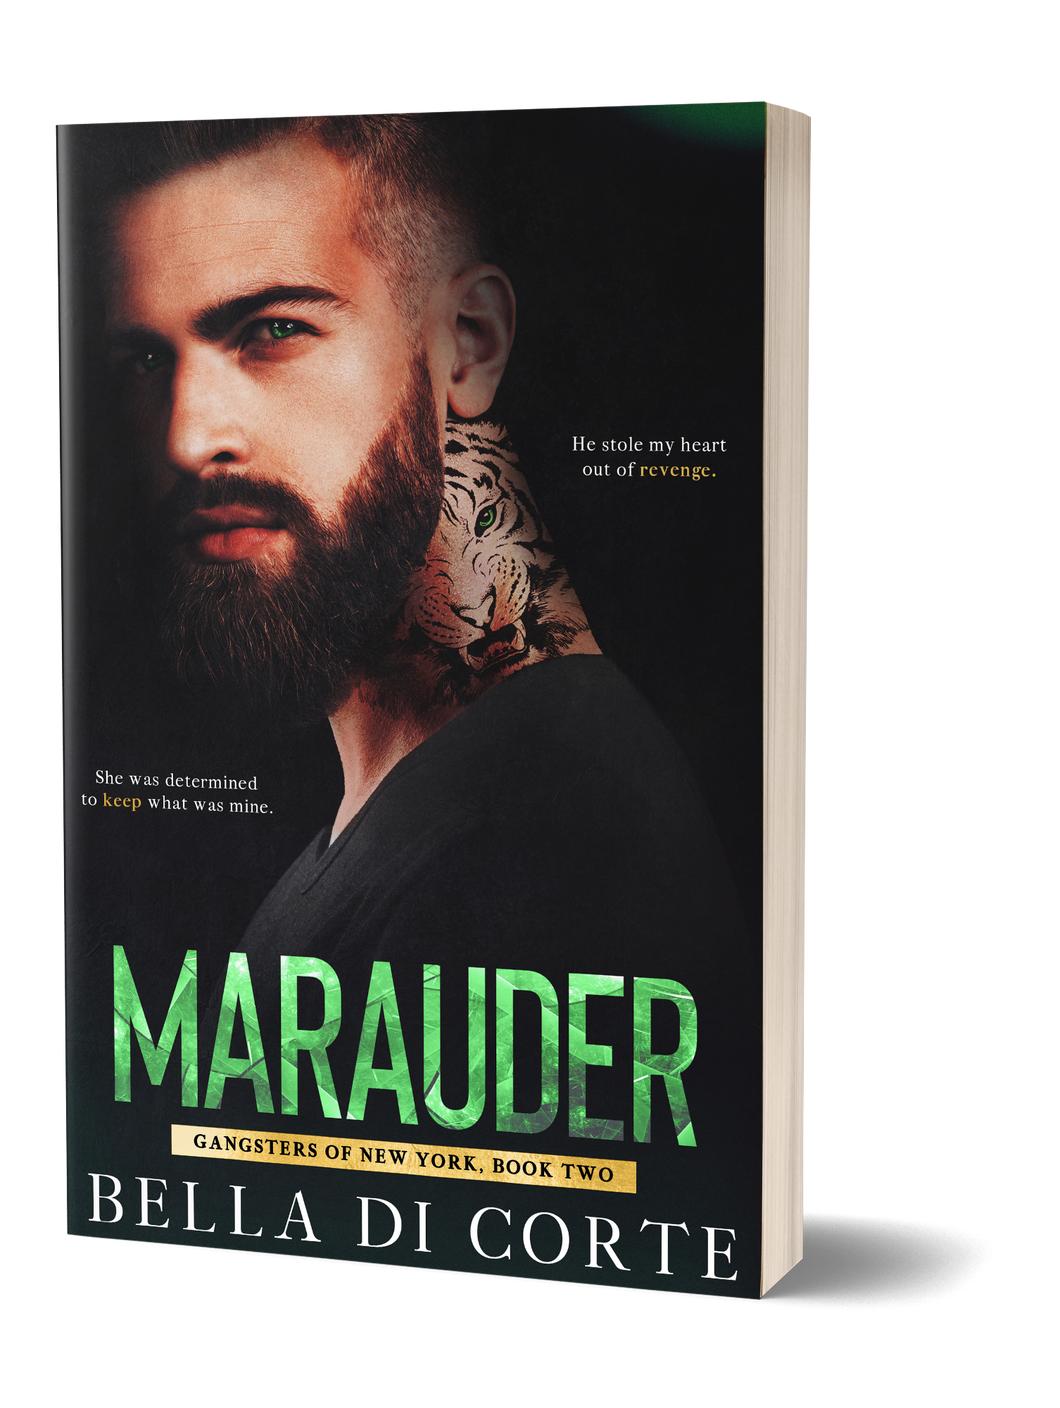 Marauder (Gangsters of New York, Book Two)